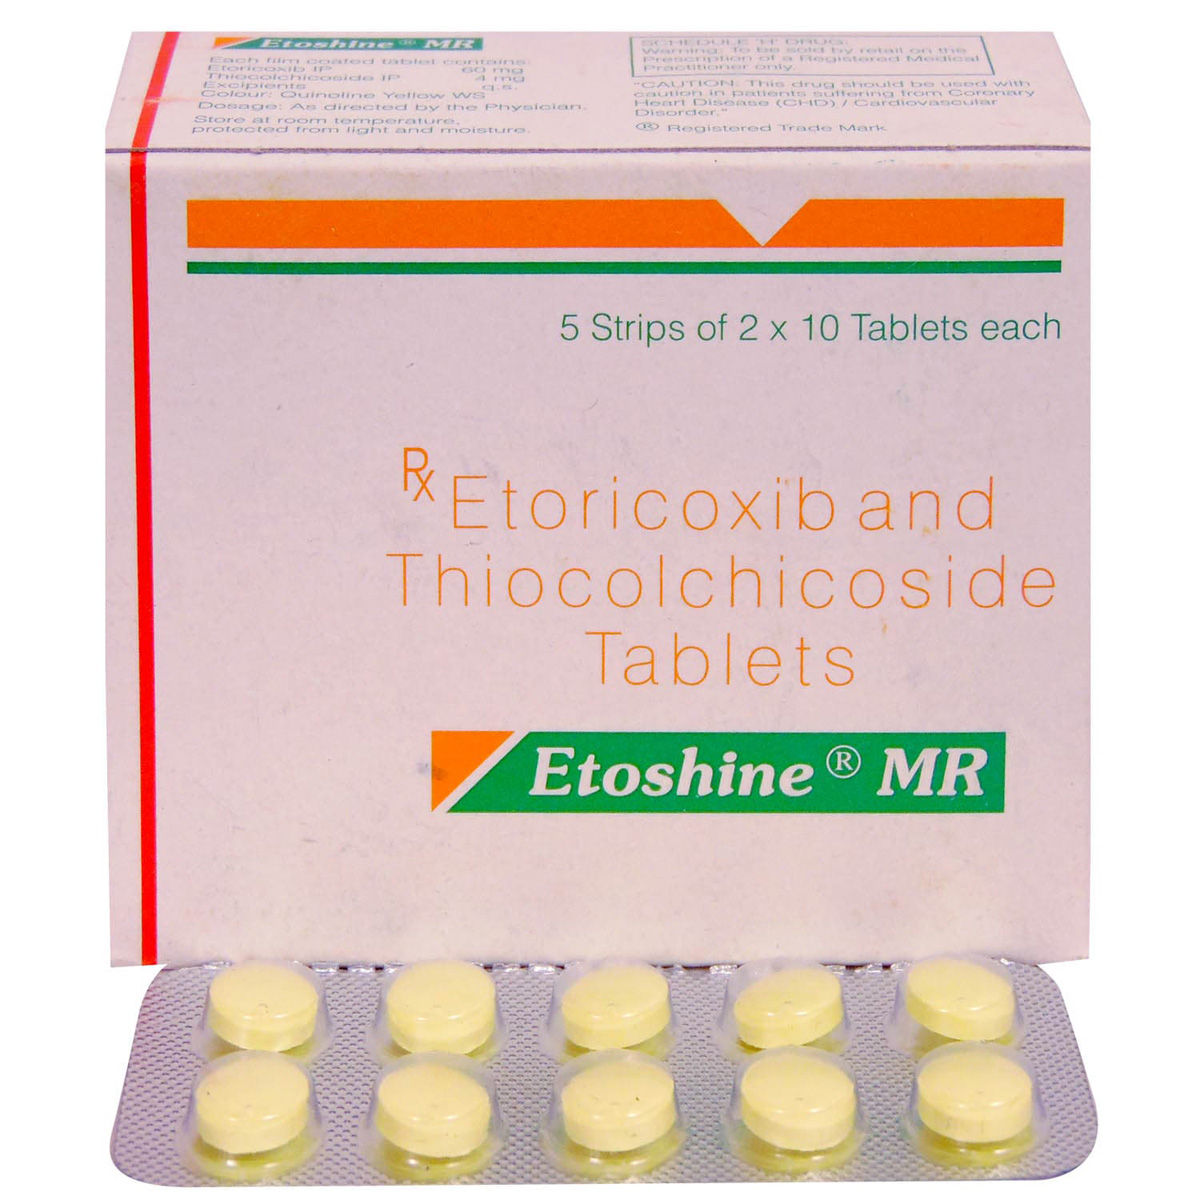 Etoshine MR Tablet 10's Price, Uses, Side Effects, Composition - Apollo  Pharmacy